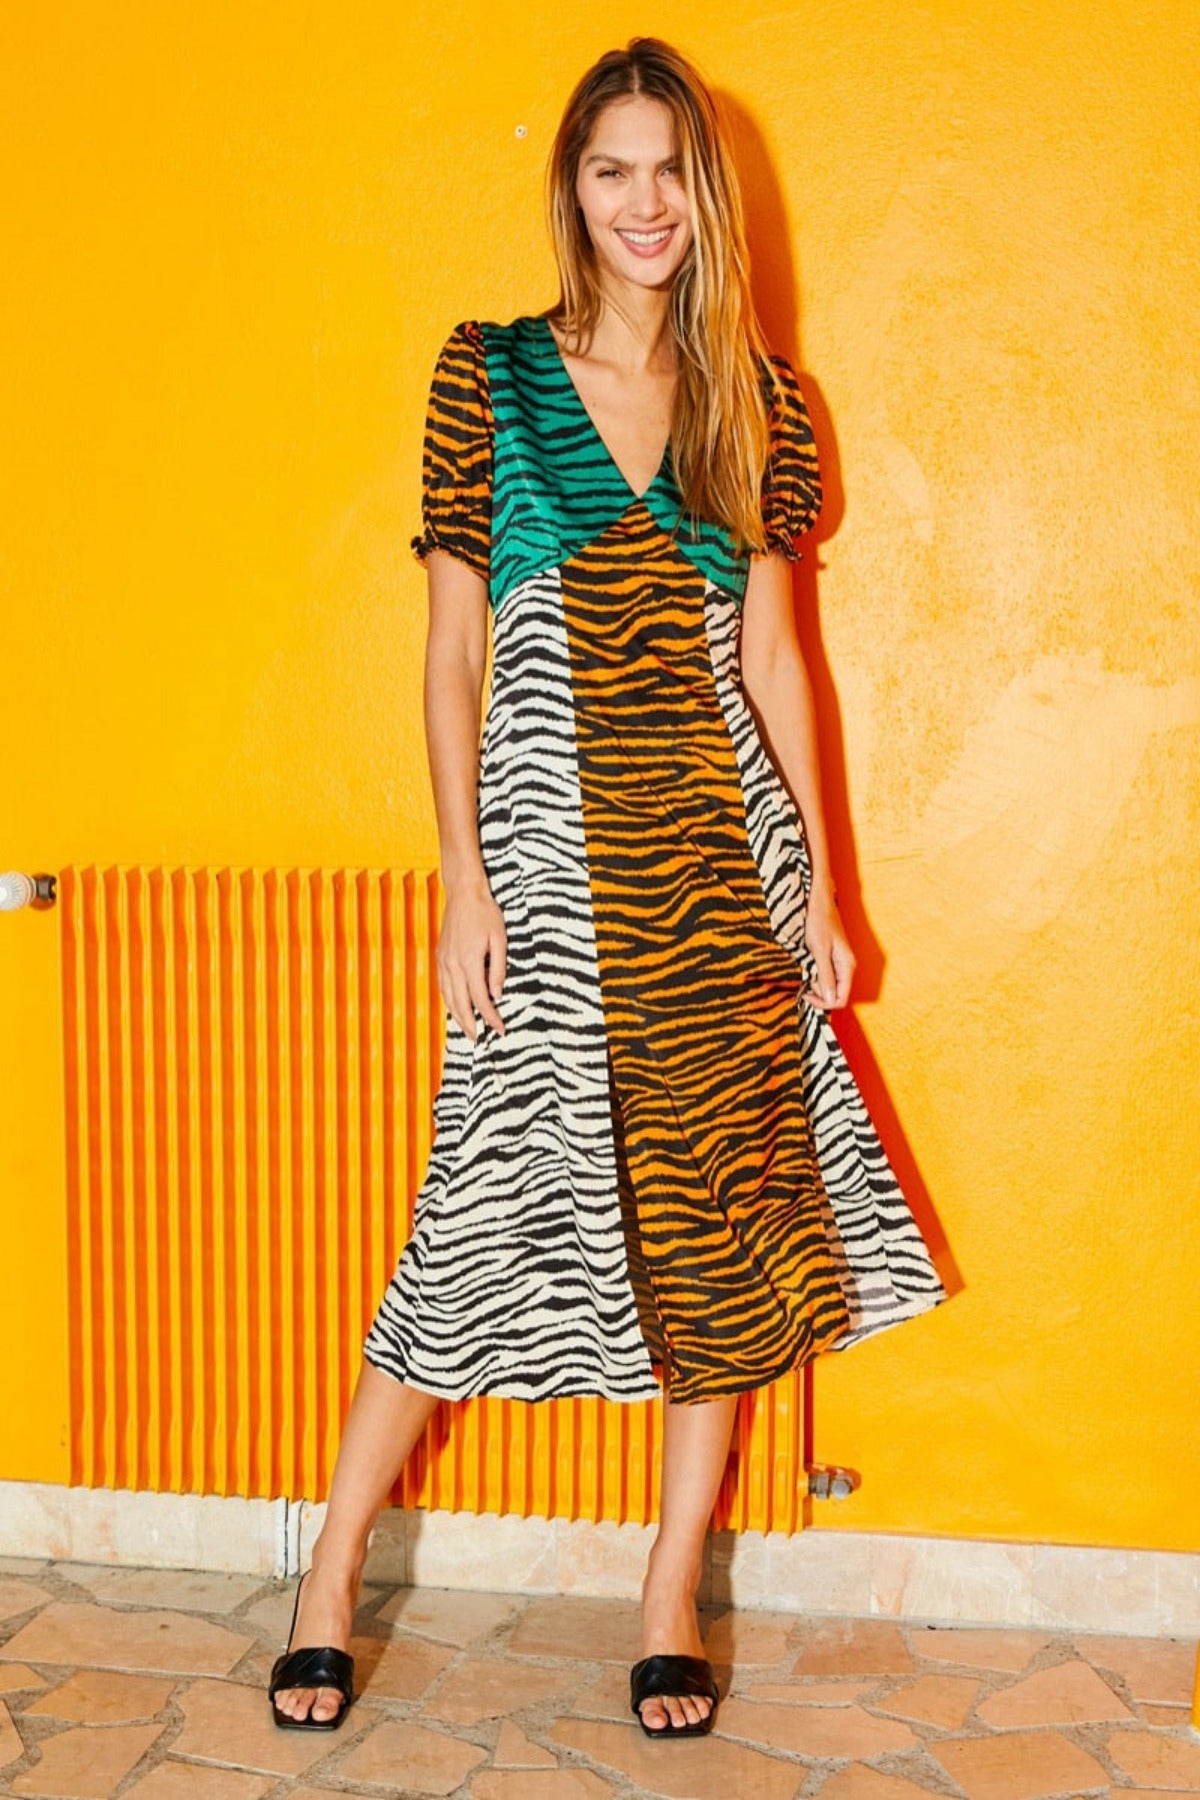 THE MULTI ZEBRA MIDI SLIP DRESS - EXCLUSIVE  from CURATED BY - Just €49! SHOP NOW AT IAMINHATELOVE BOTH IN STORE FOR CYPRUS AND ONLINE WORLDWIDE @ IAMINHATELOVE.COM